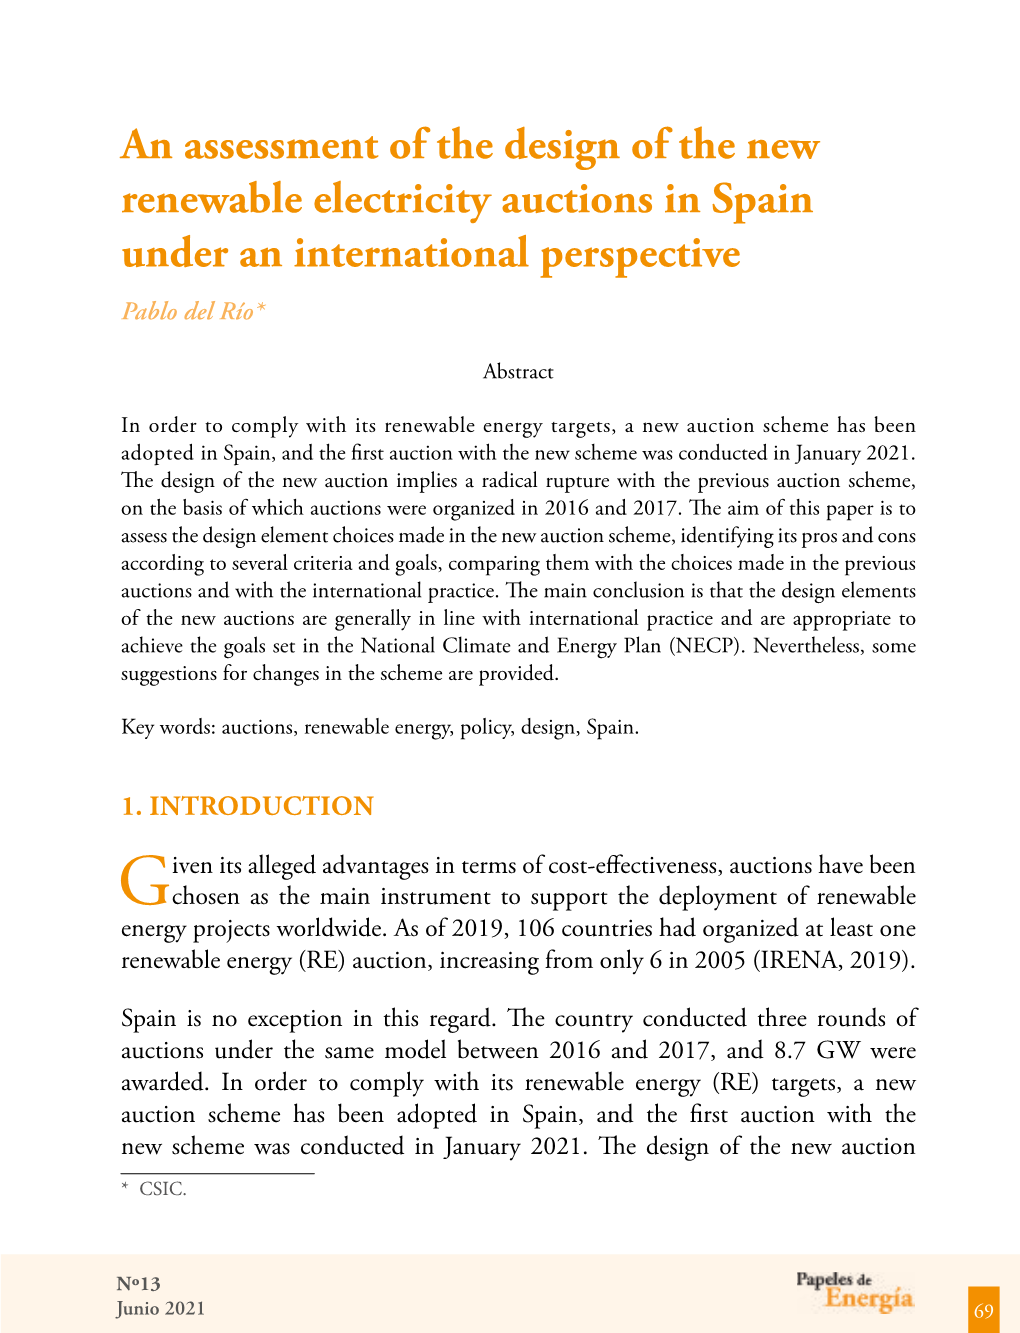 An Assessment of the Design of the New Renewable Electricity Auctions in Spain Under an International Perspective Pablo Del Río*